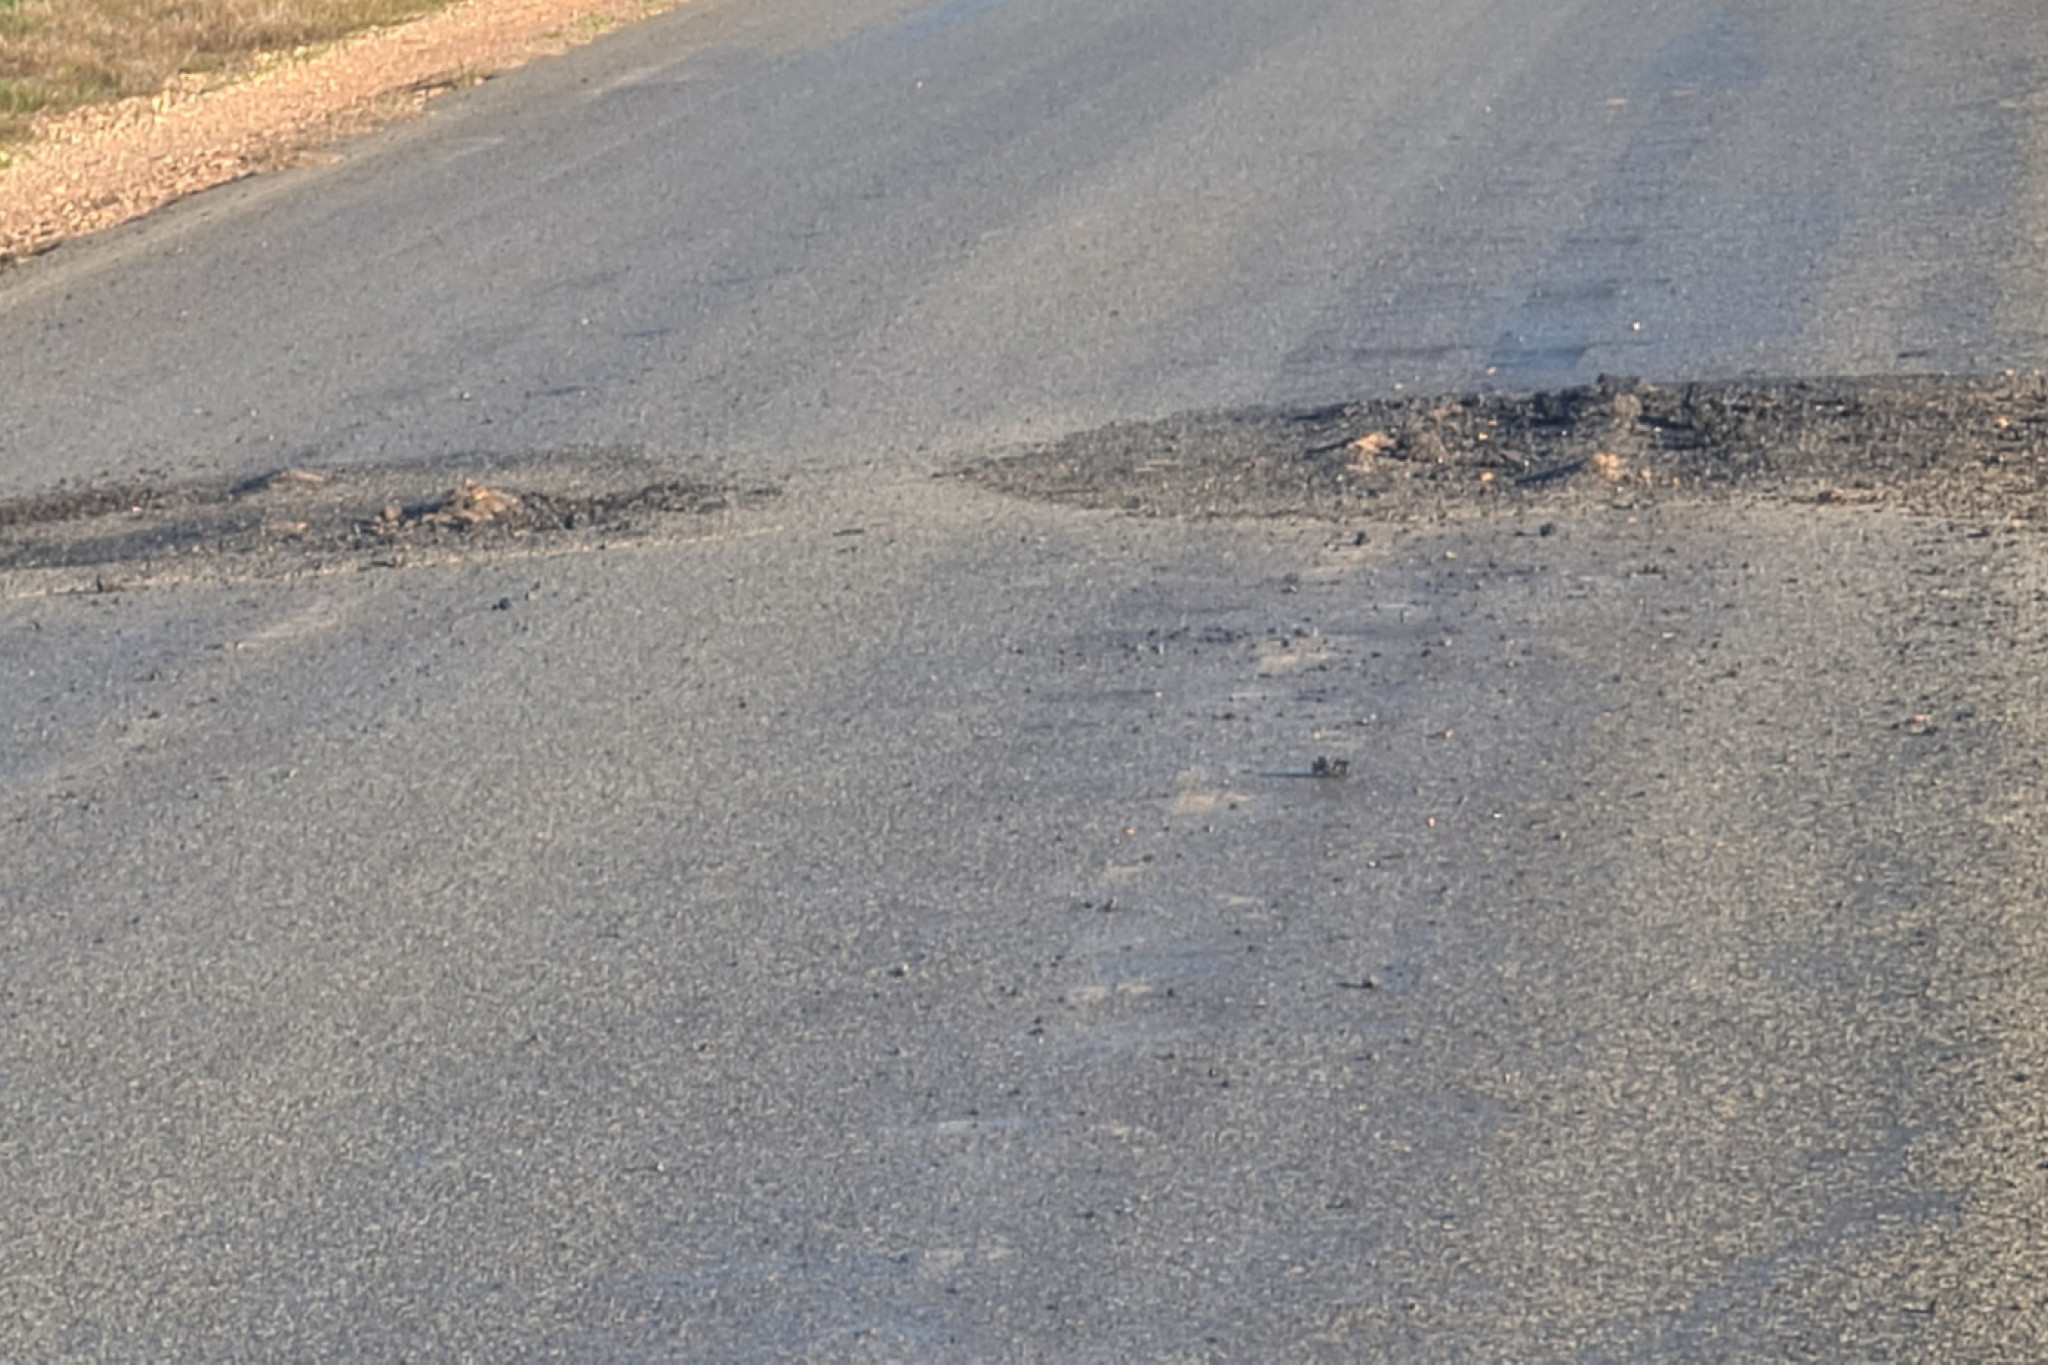 Local roads were in a state of disrepair even before last year's unprecedented rainfall, which caused widespread damage in the area, much to local residents’ frustration.